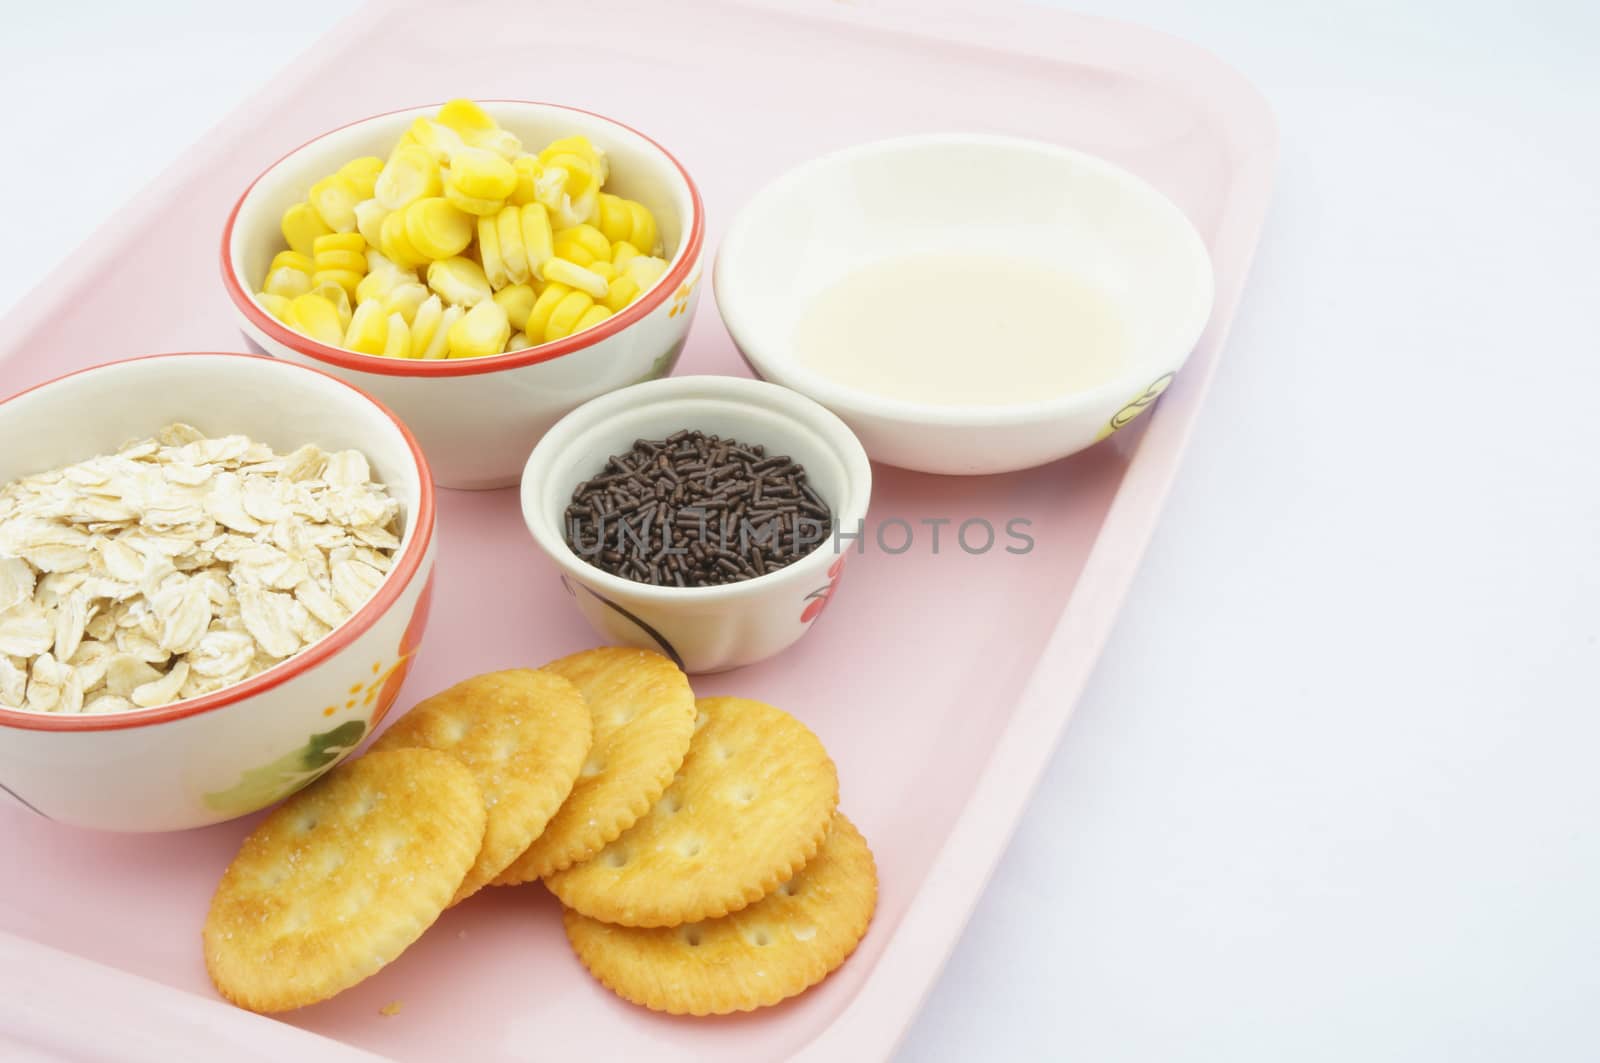 Corn oats chocolate cracker sweetened condensed milk pink tray by eaglesky